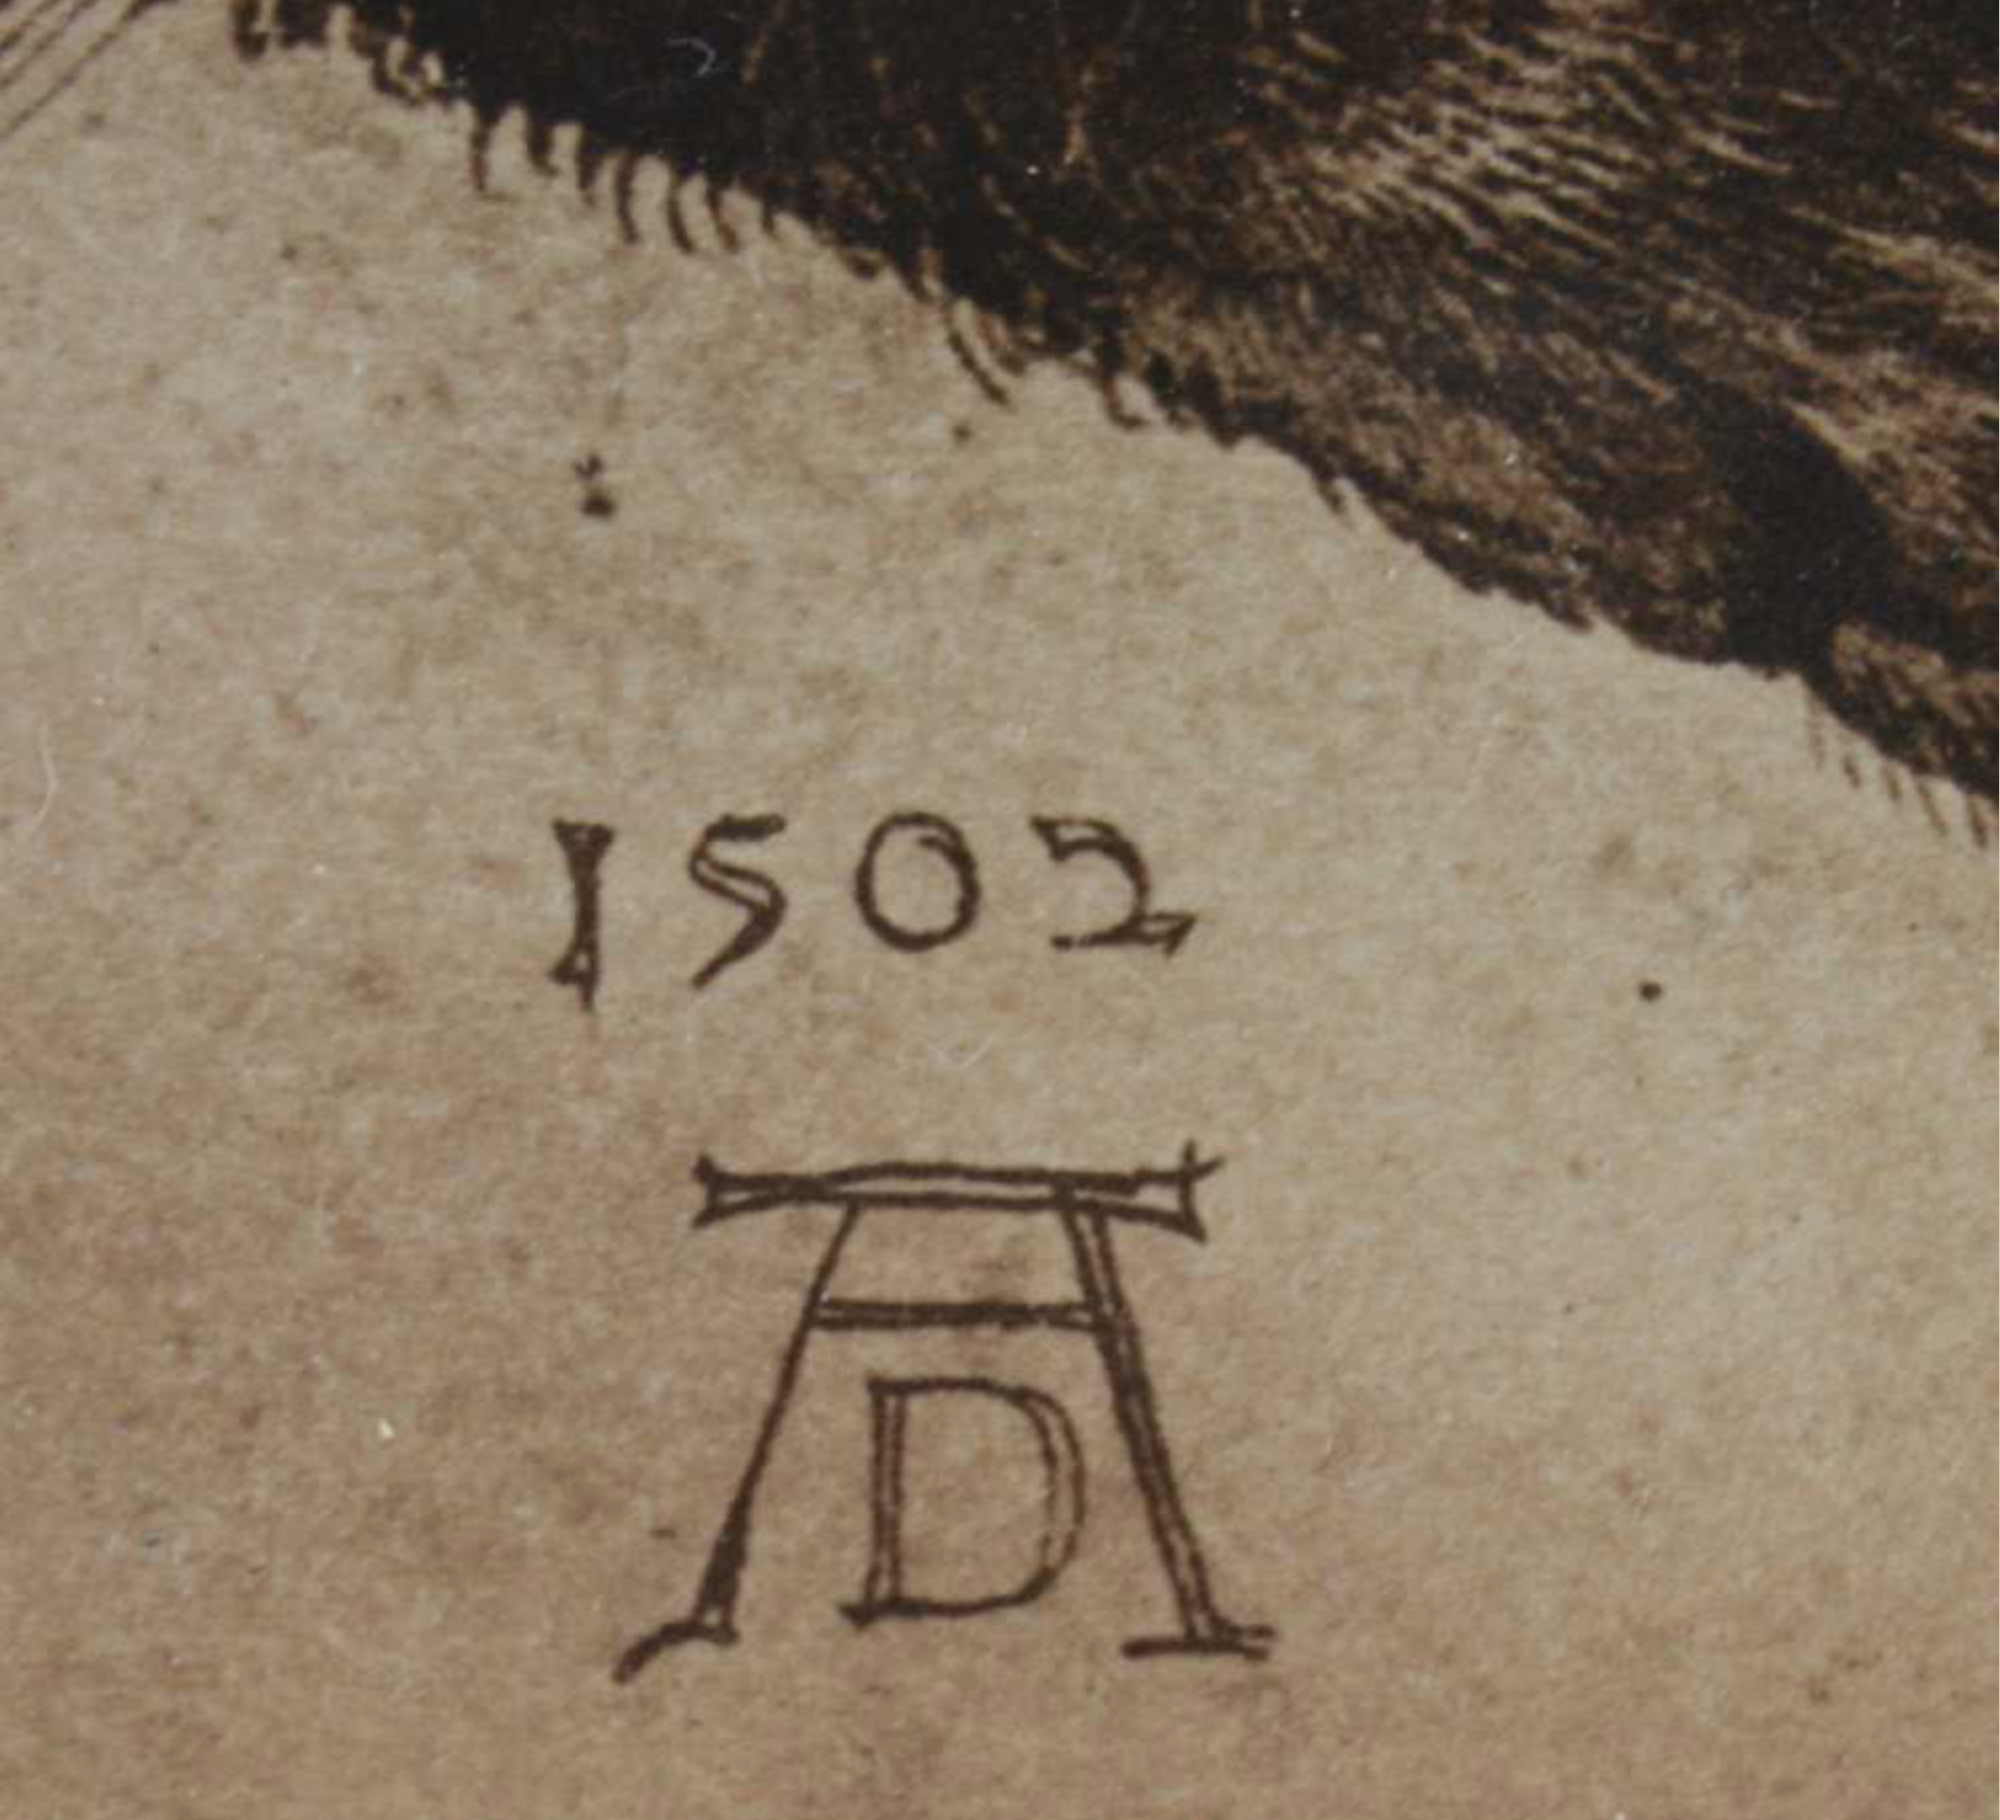 Possibly the most famous craftsman monogram is this by printer maker Albrecht Dürer, which he began to use in 1497. Detail from lot of two prints by Albrecht Dürer, Cobbs Auctioneers.